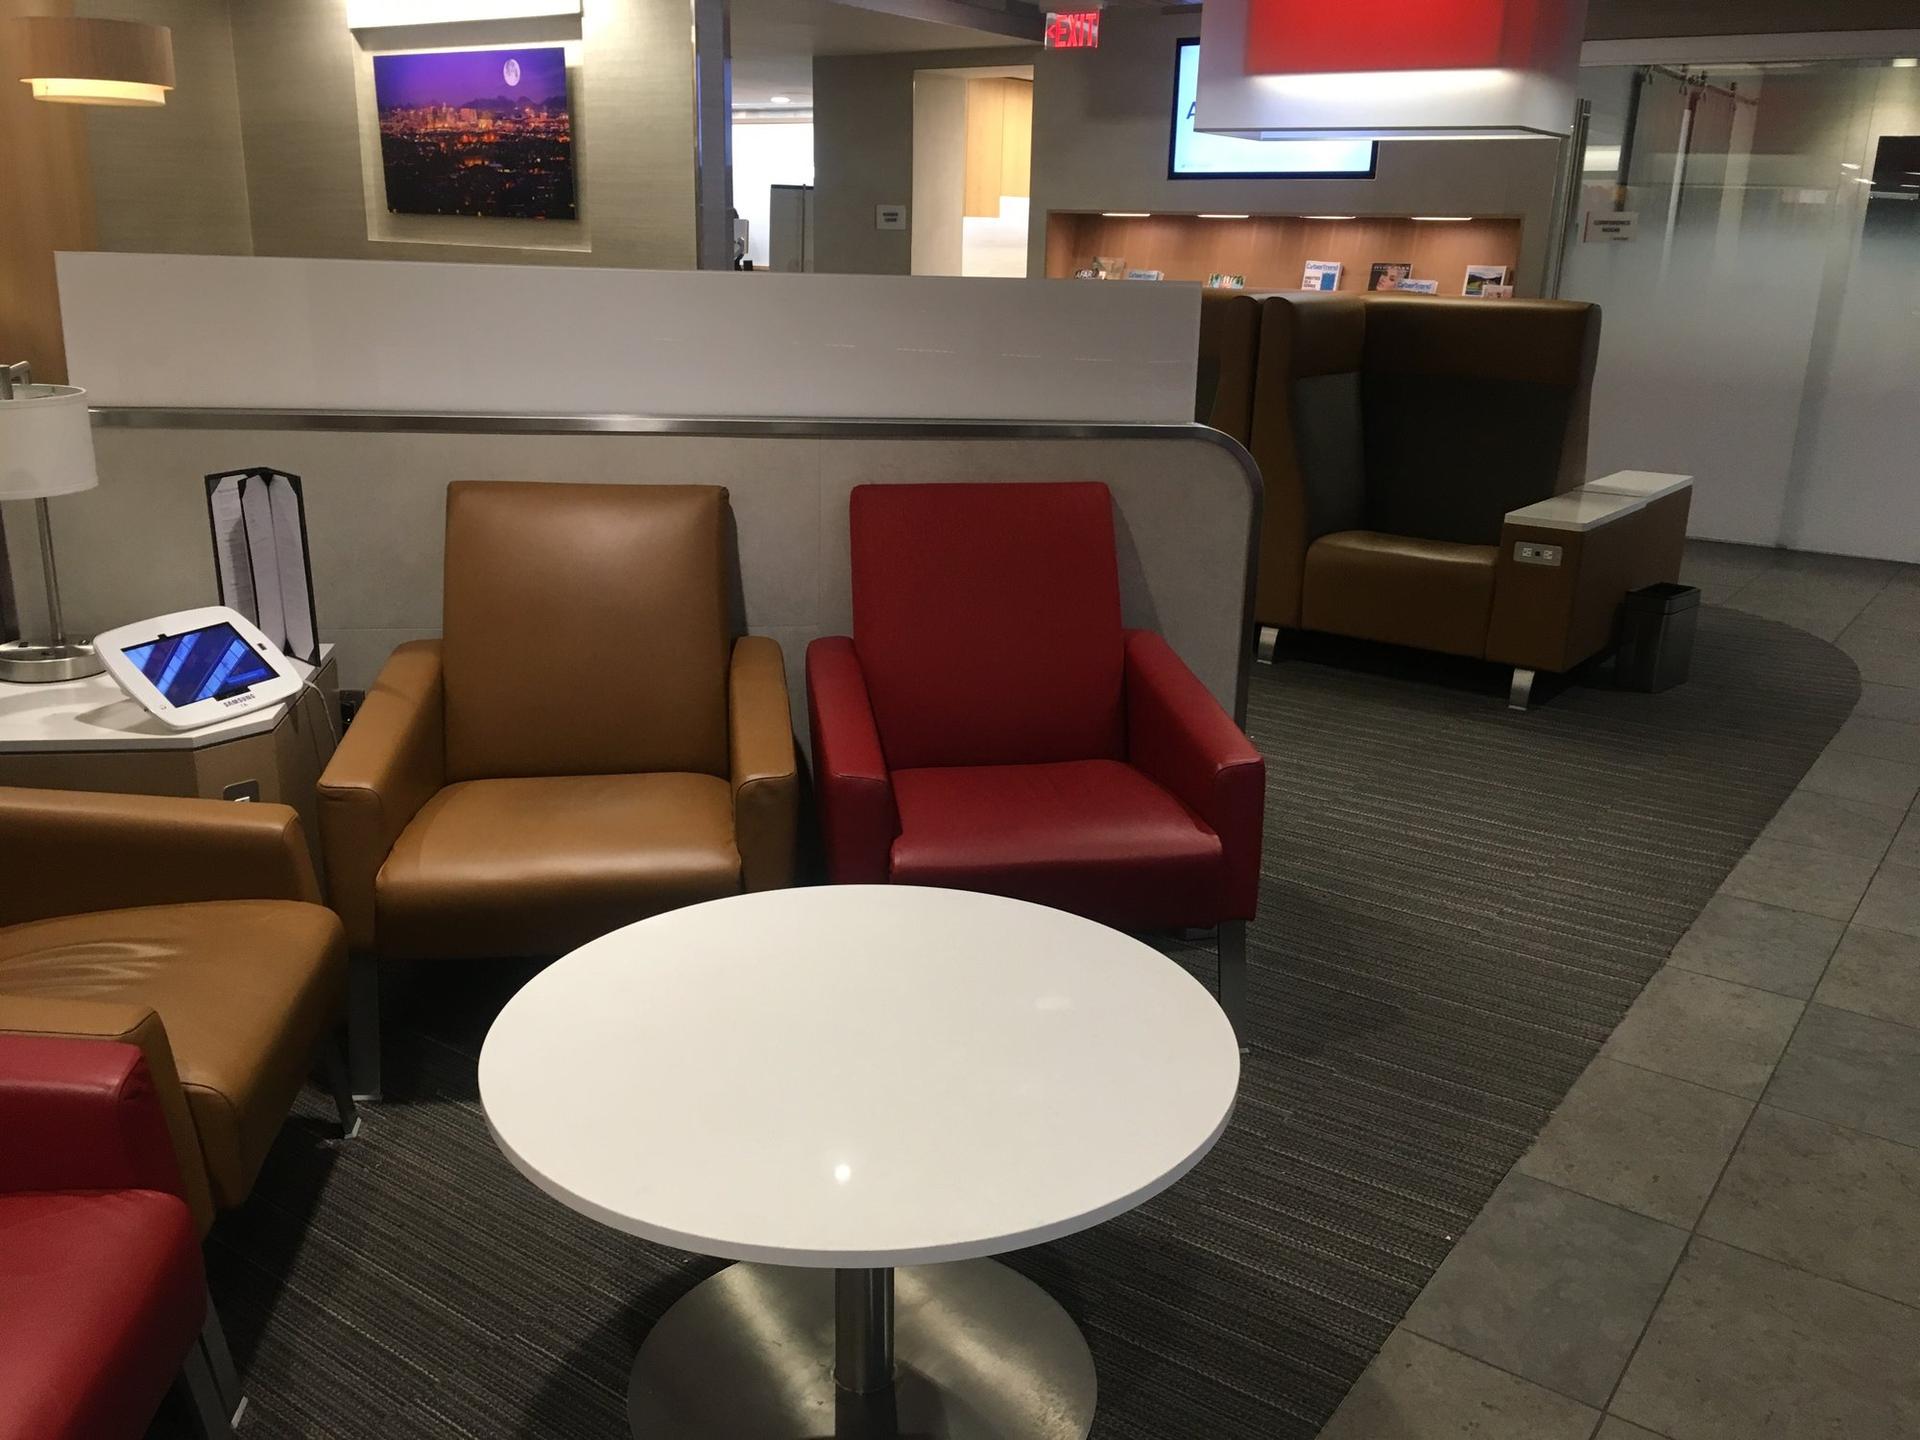 American Airlines Admirals Club (Gate A7) image 17 of 25